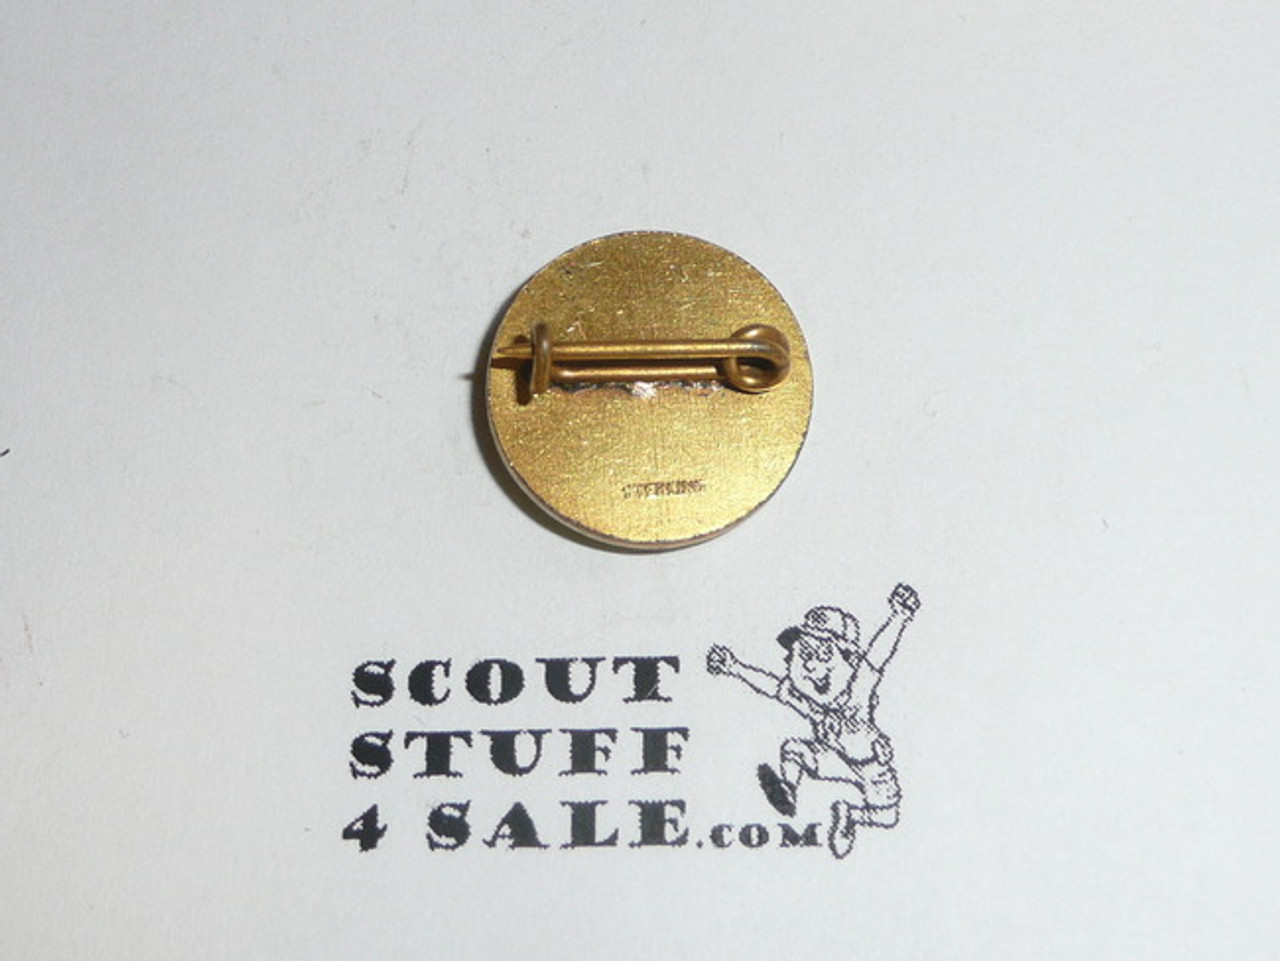 Junior Assistant Scoutmaster Lapel Pin, crude Horizontal bent wire Back, STERLING Marked, 1940's, 5/8" dia, Scarce